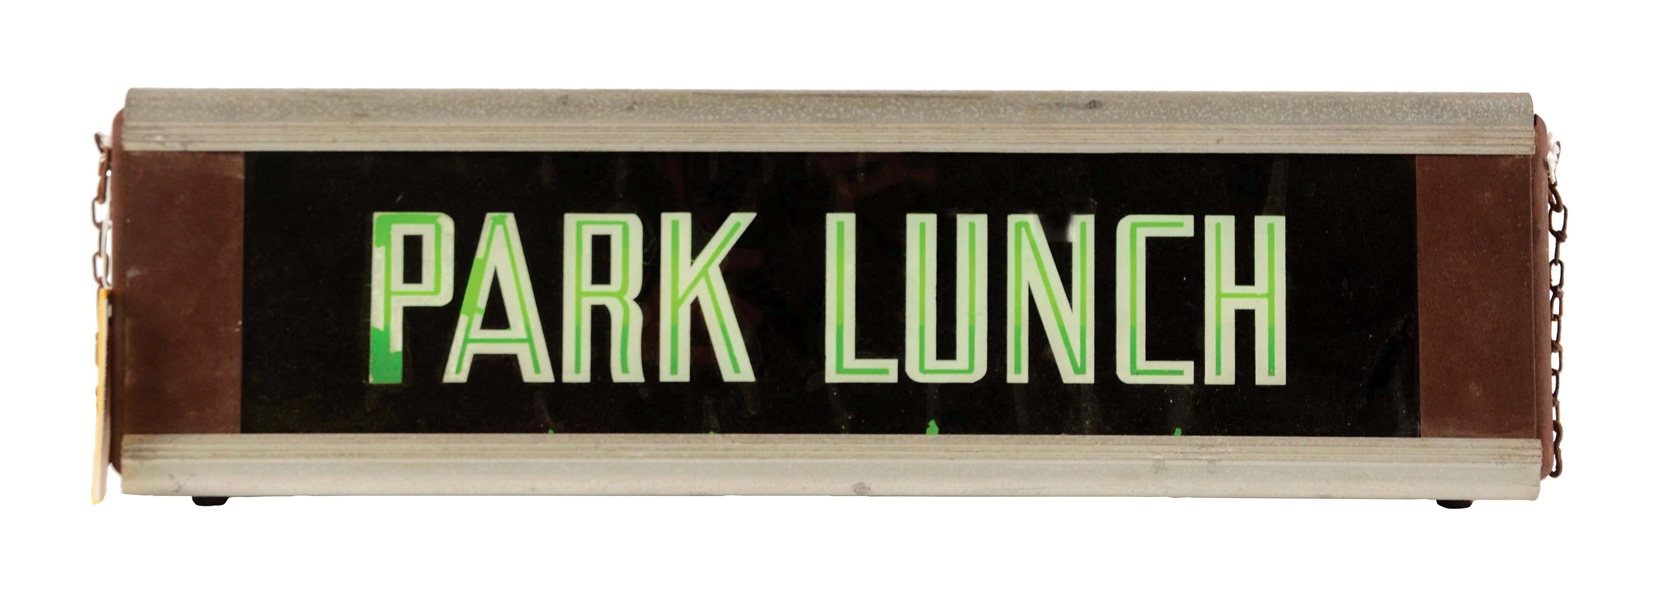 PARK LUNCH GLASS FACE LIGHT UP SIGN ON ORIGINAL METAL CAN.